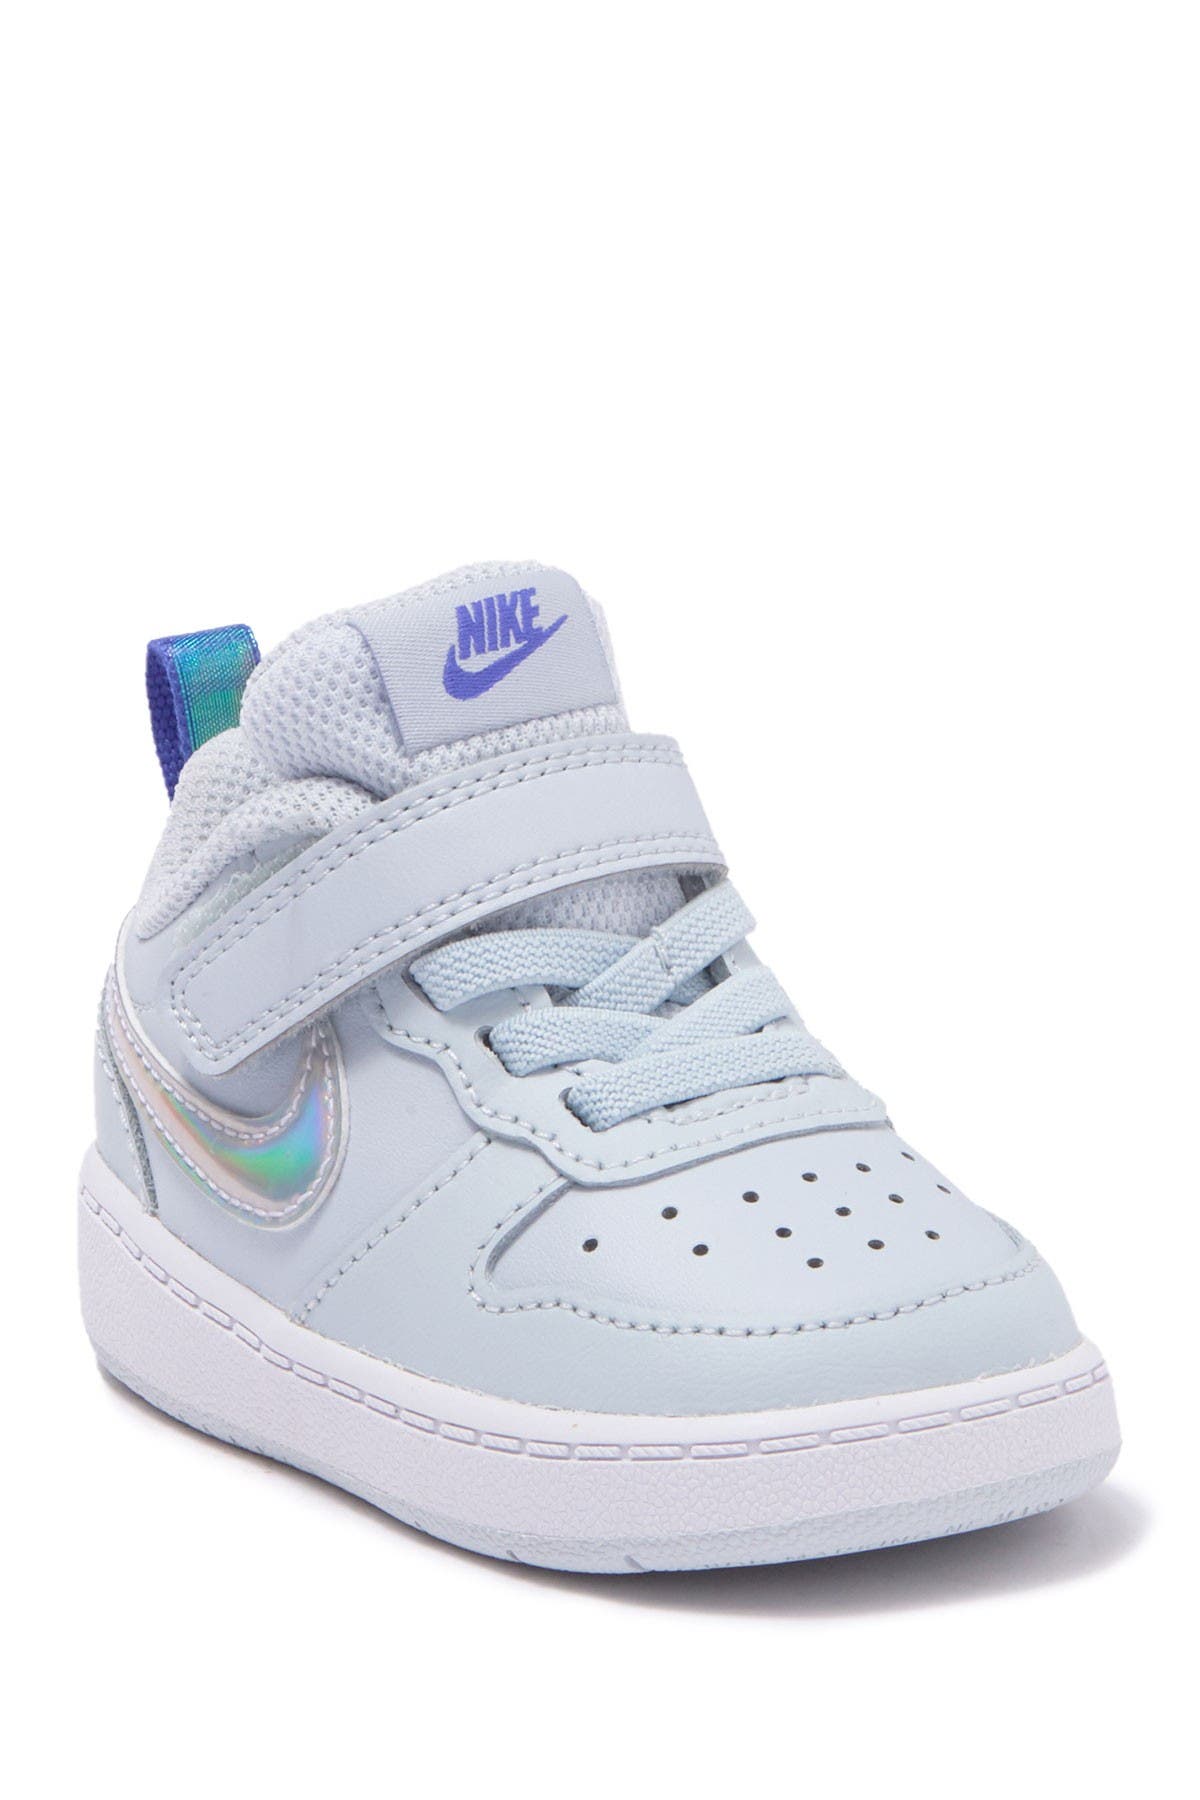 nike high top baby shoes